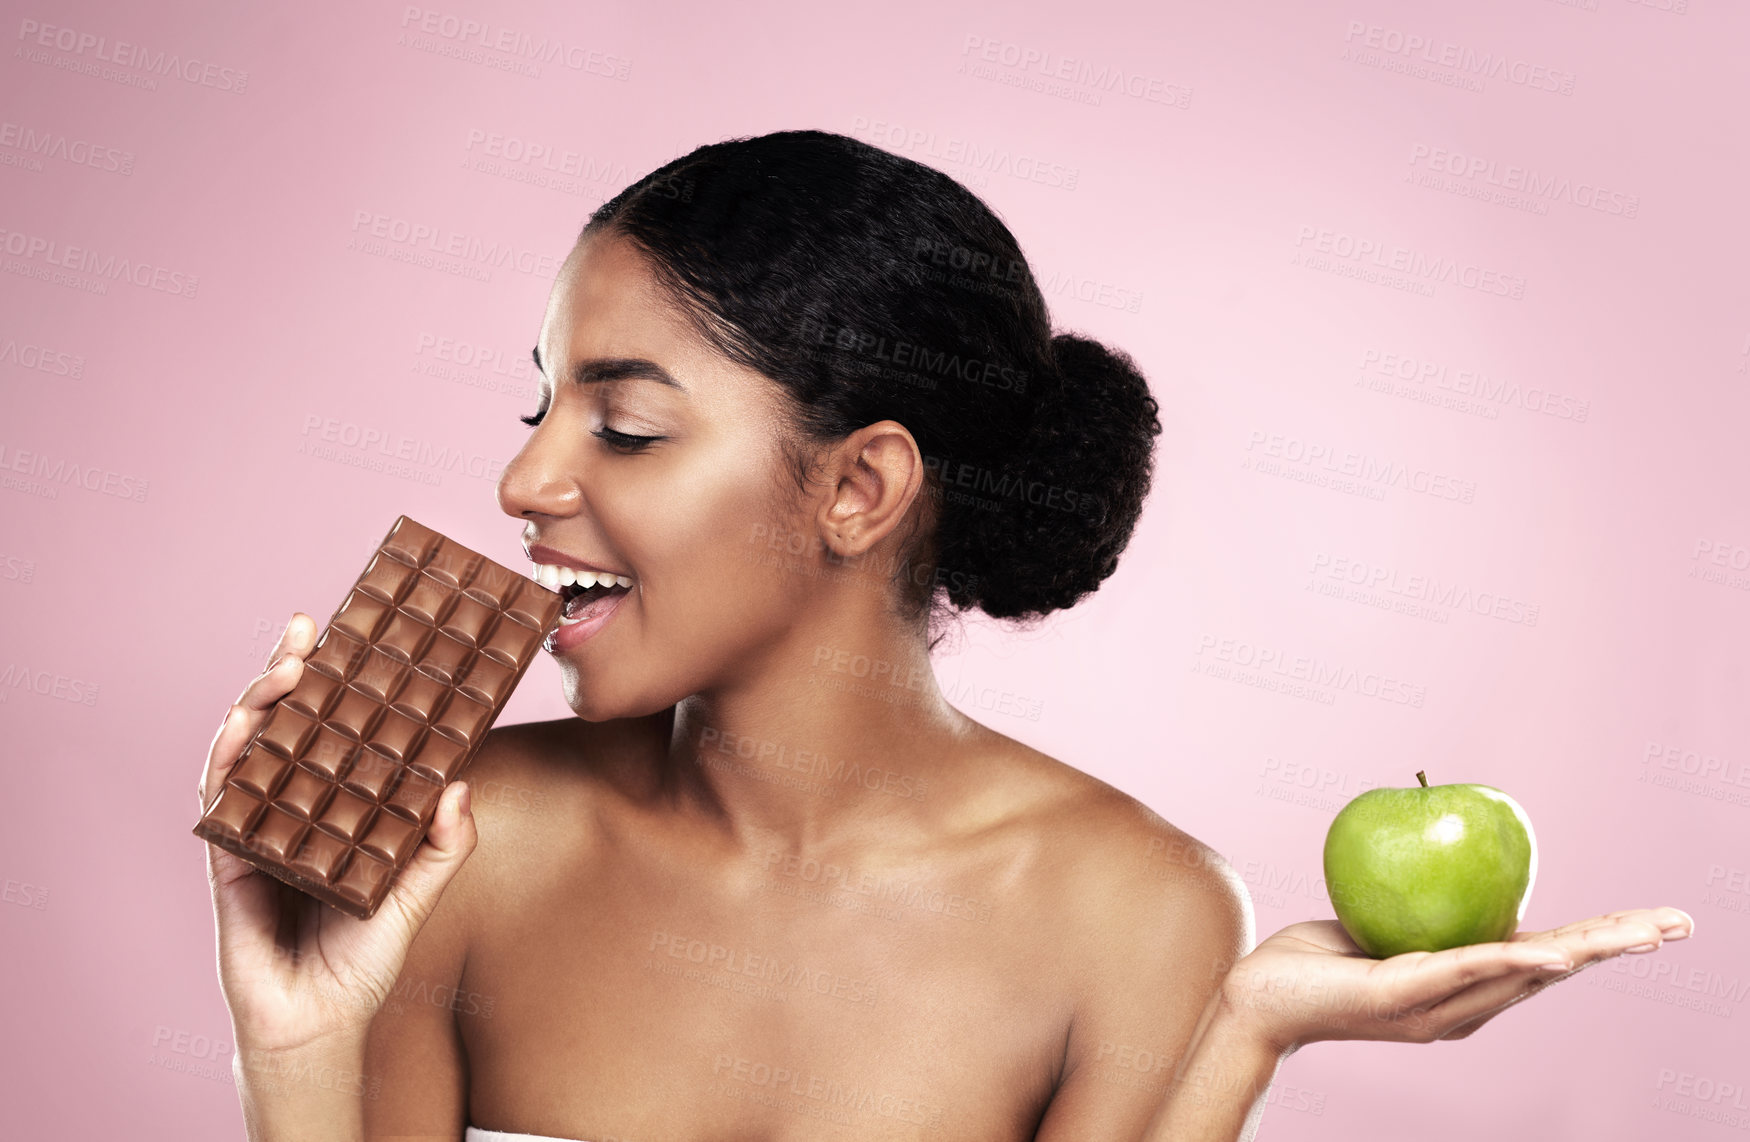 Buy stock photo Black woman, health choice and fruit or chocolate option isolated on studio background. Young female person or model and food decision for balanced diet, weight loss journey and organic benefits